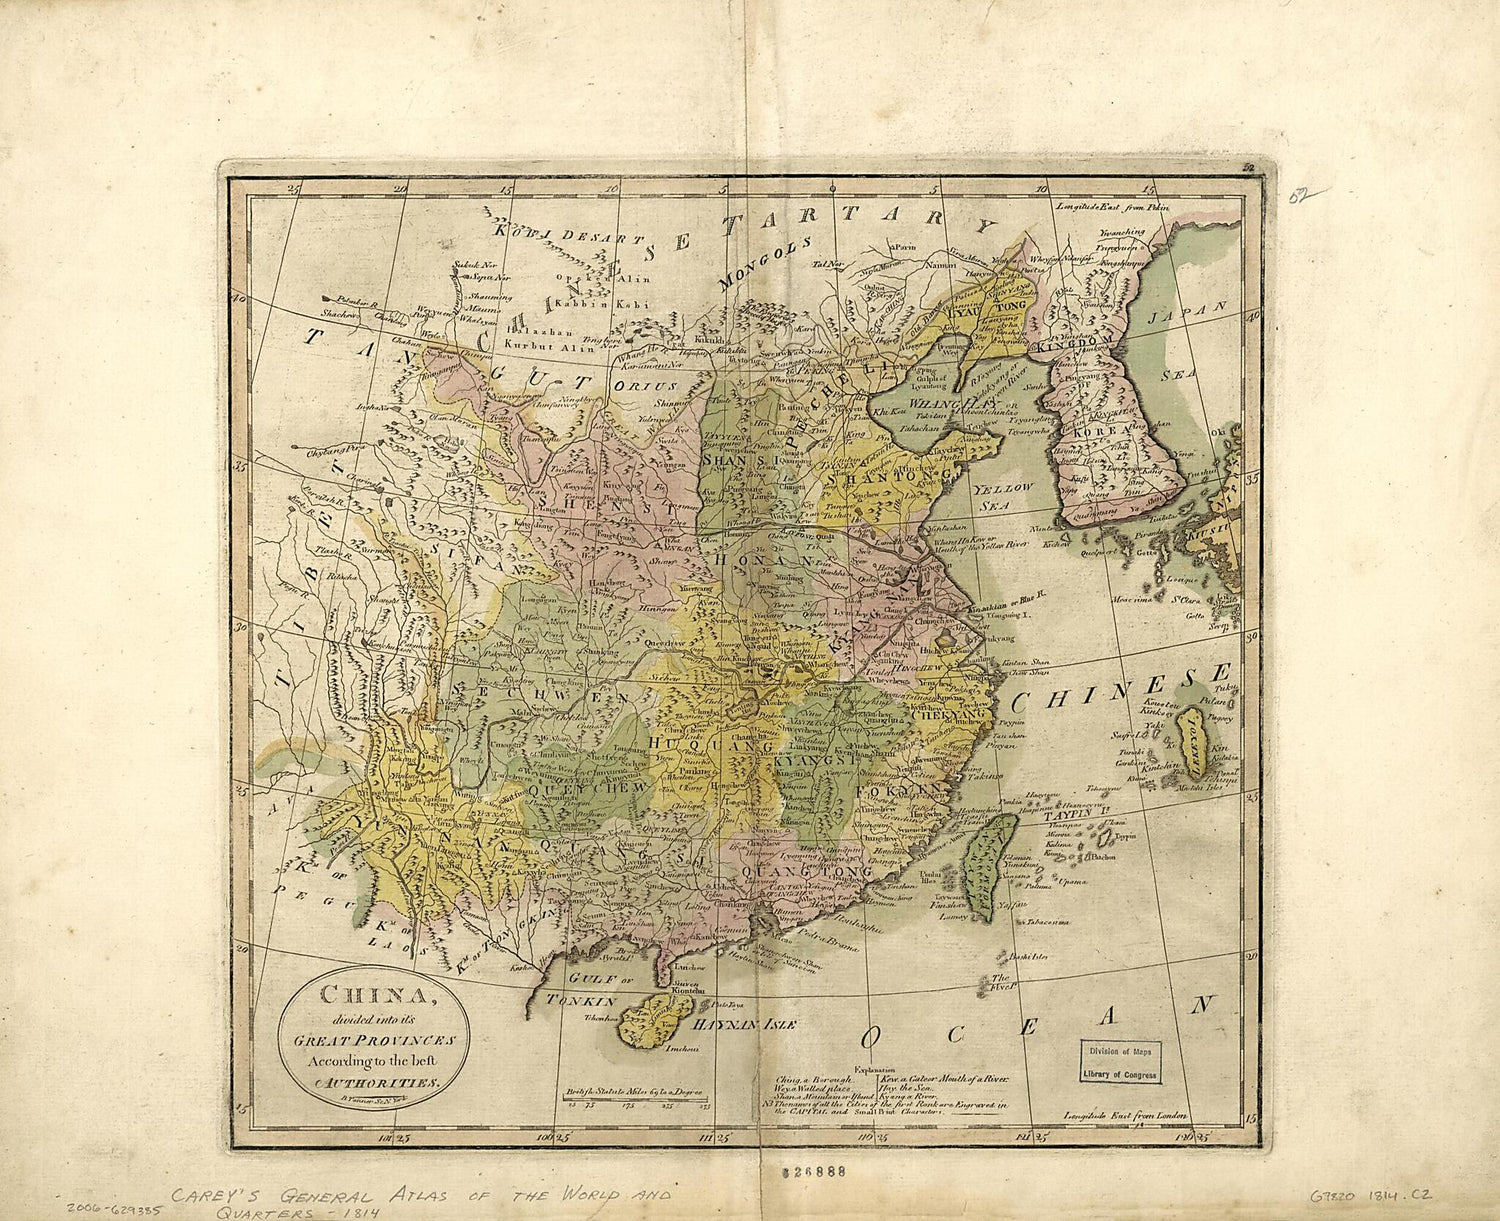 This old map of China Divided Into Its Great Provinces According to the Best Authorities from 1814 was created by Mathew Carey in 1814